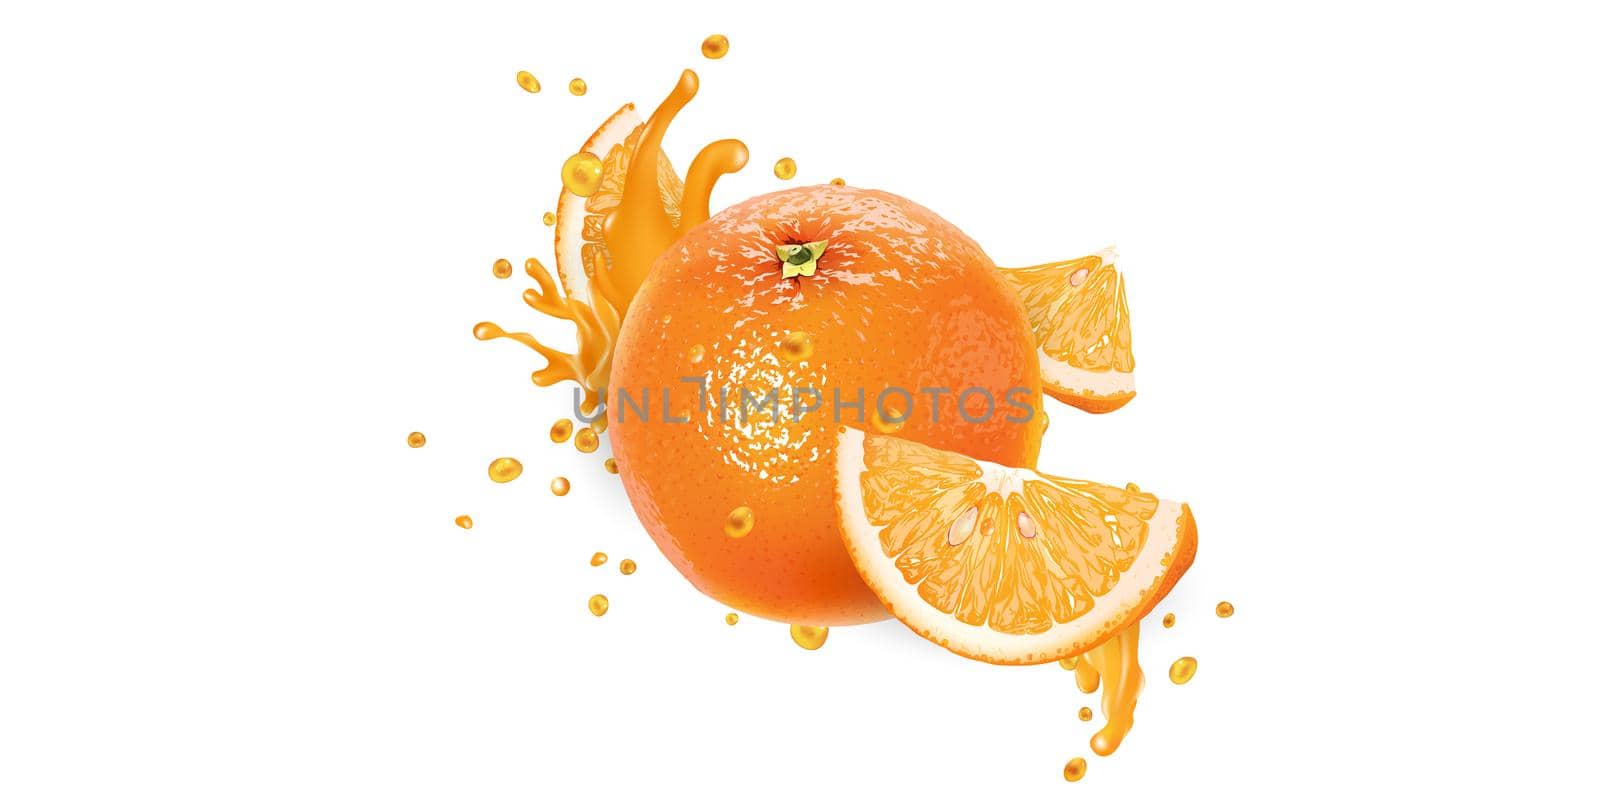 Whole orange and slices in fruit juice splashes. by ConceptCafe